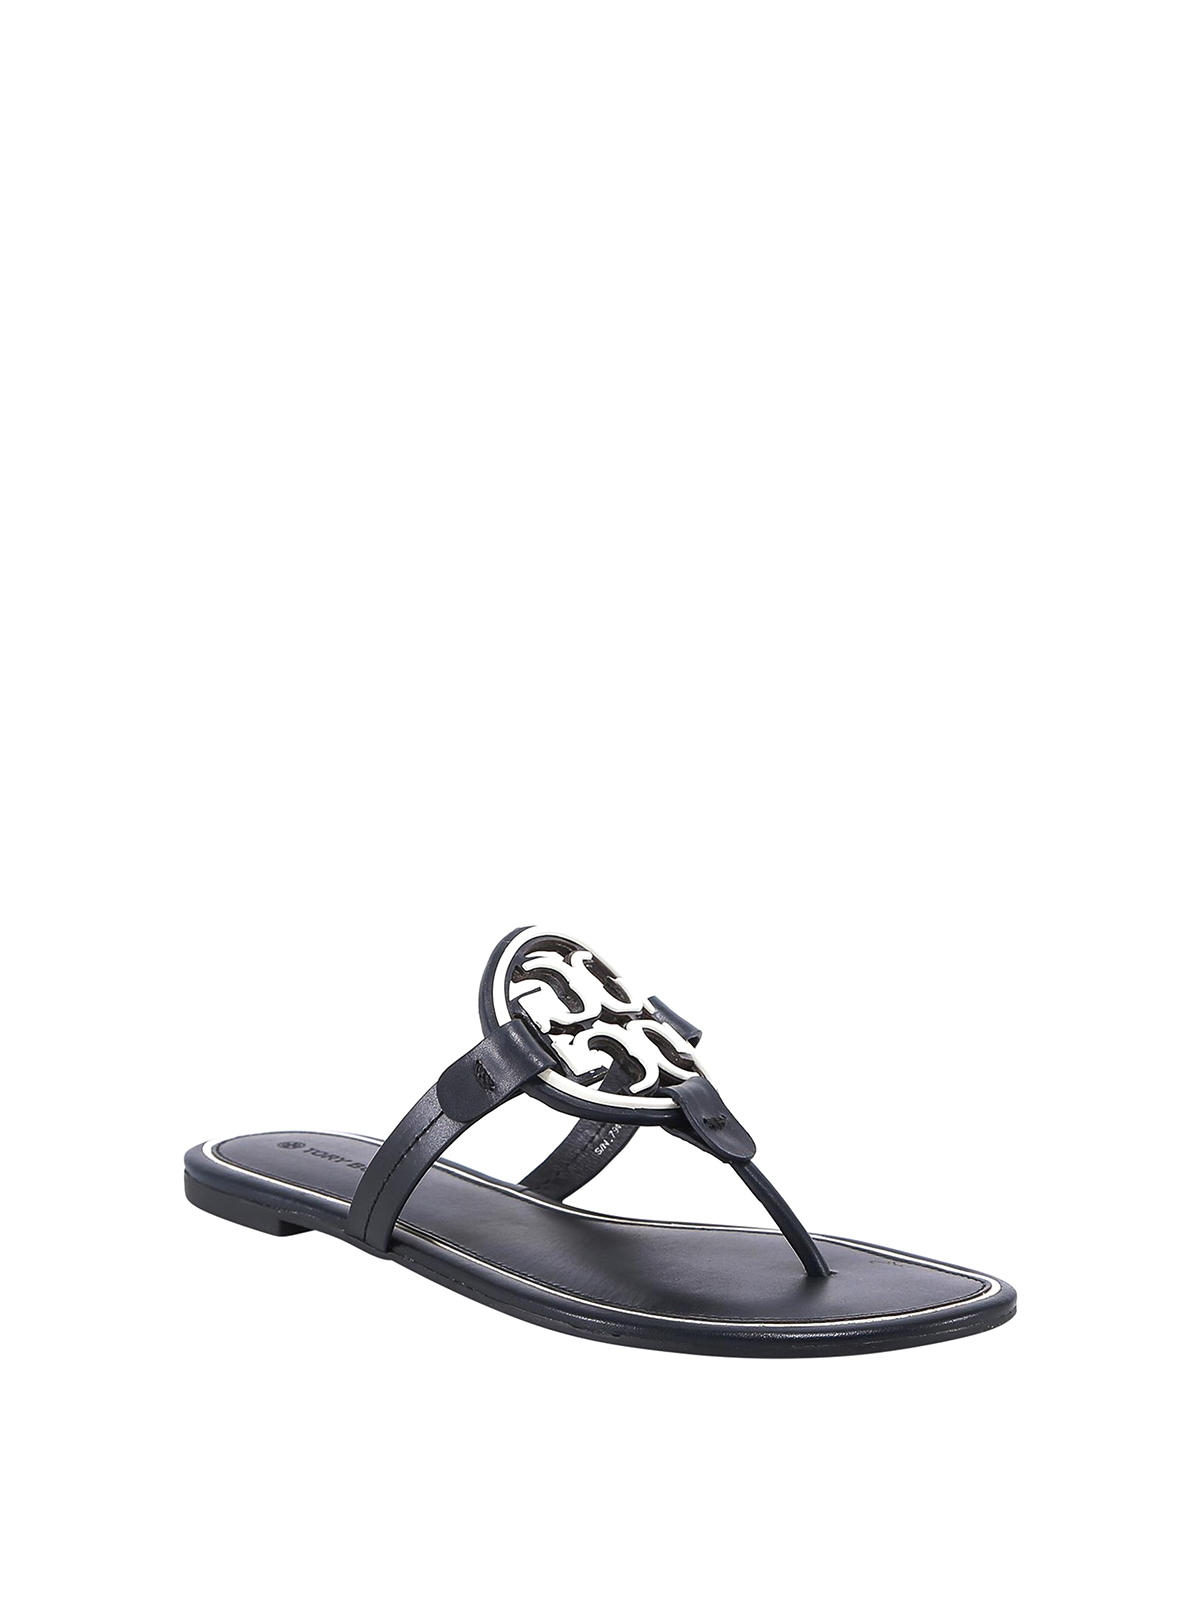 Sandals Tory Burch - Miller leather sandals - 79439416 